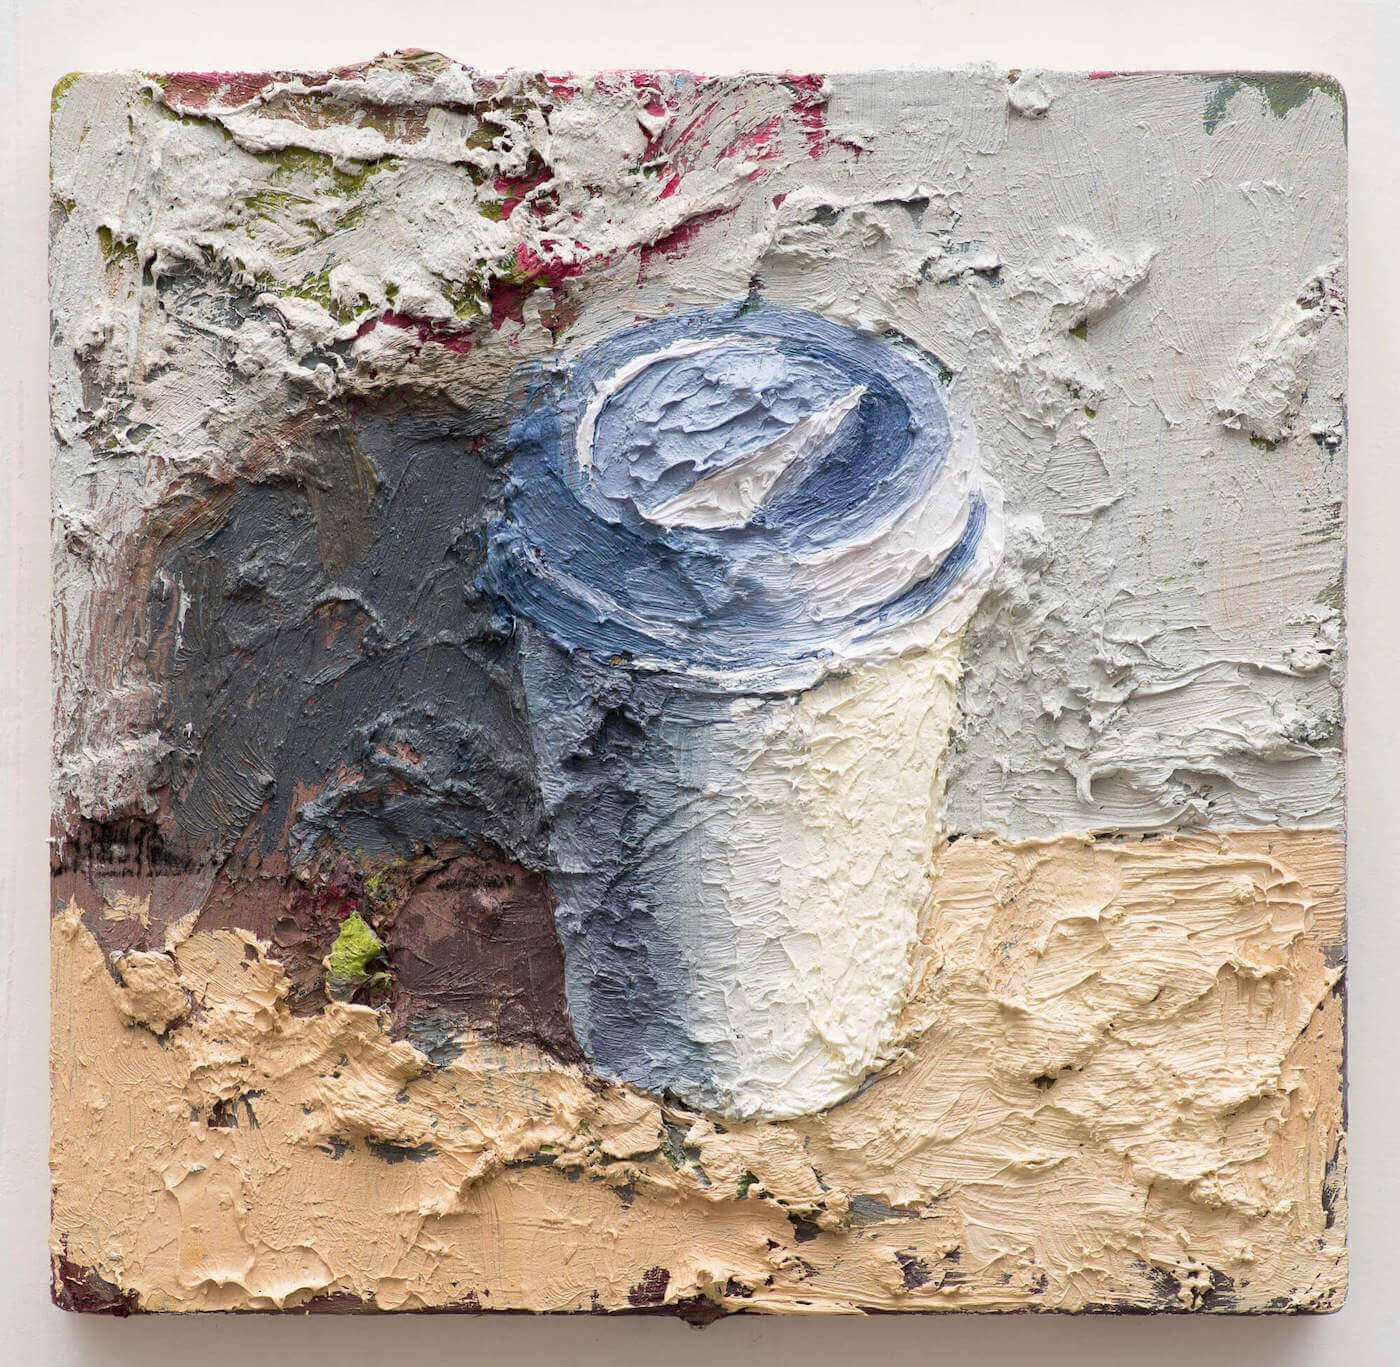 Avital Burg, Snow paper cup, 2021, oil on wood, 8 x 8.25 inches (courtesy of the artist)